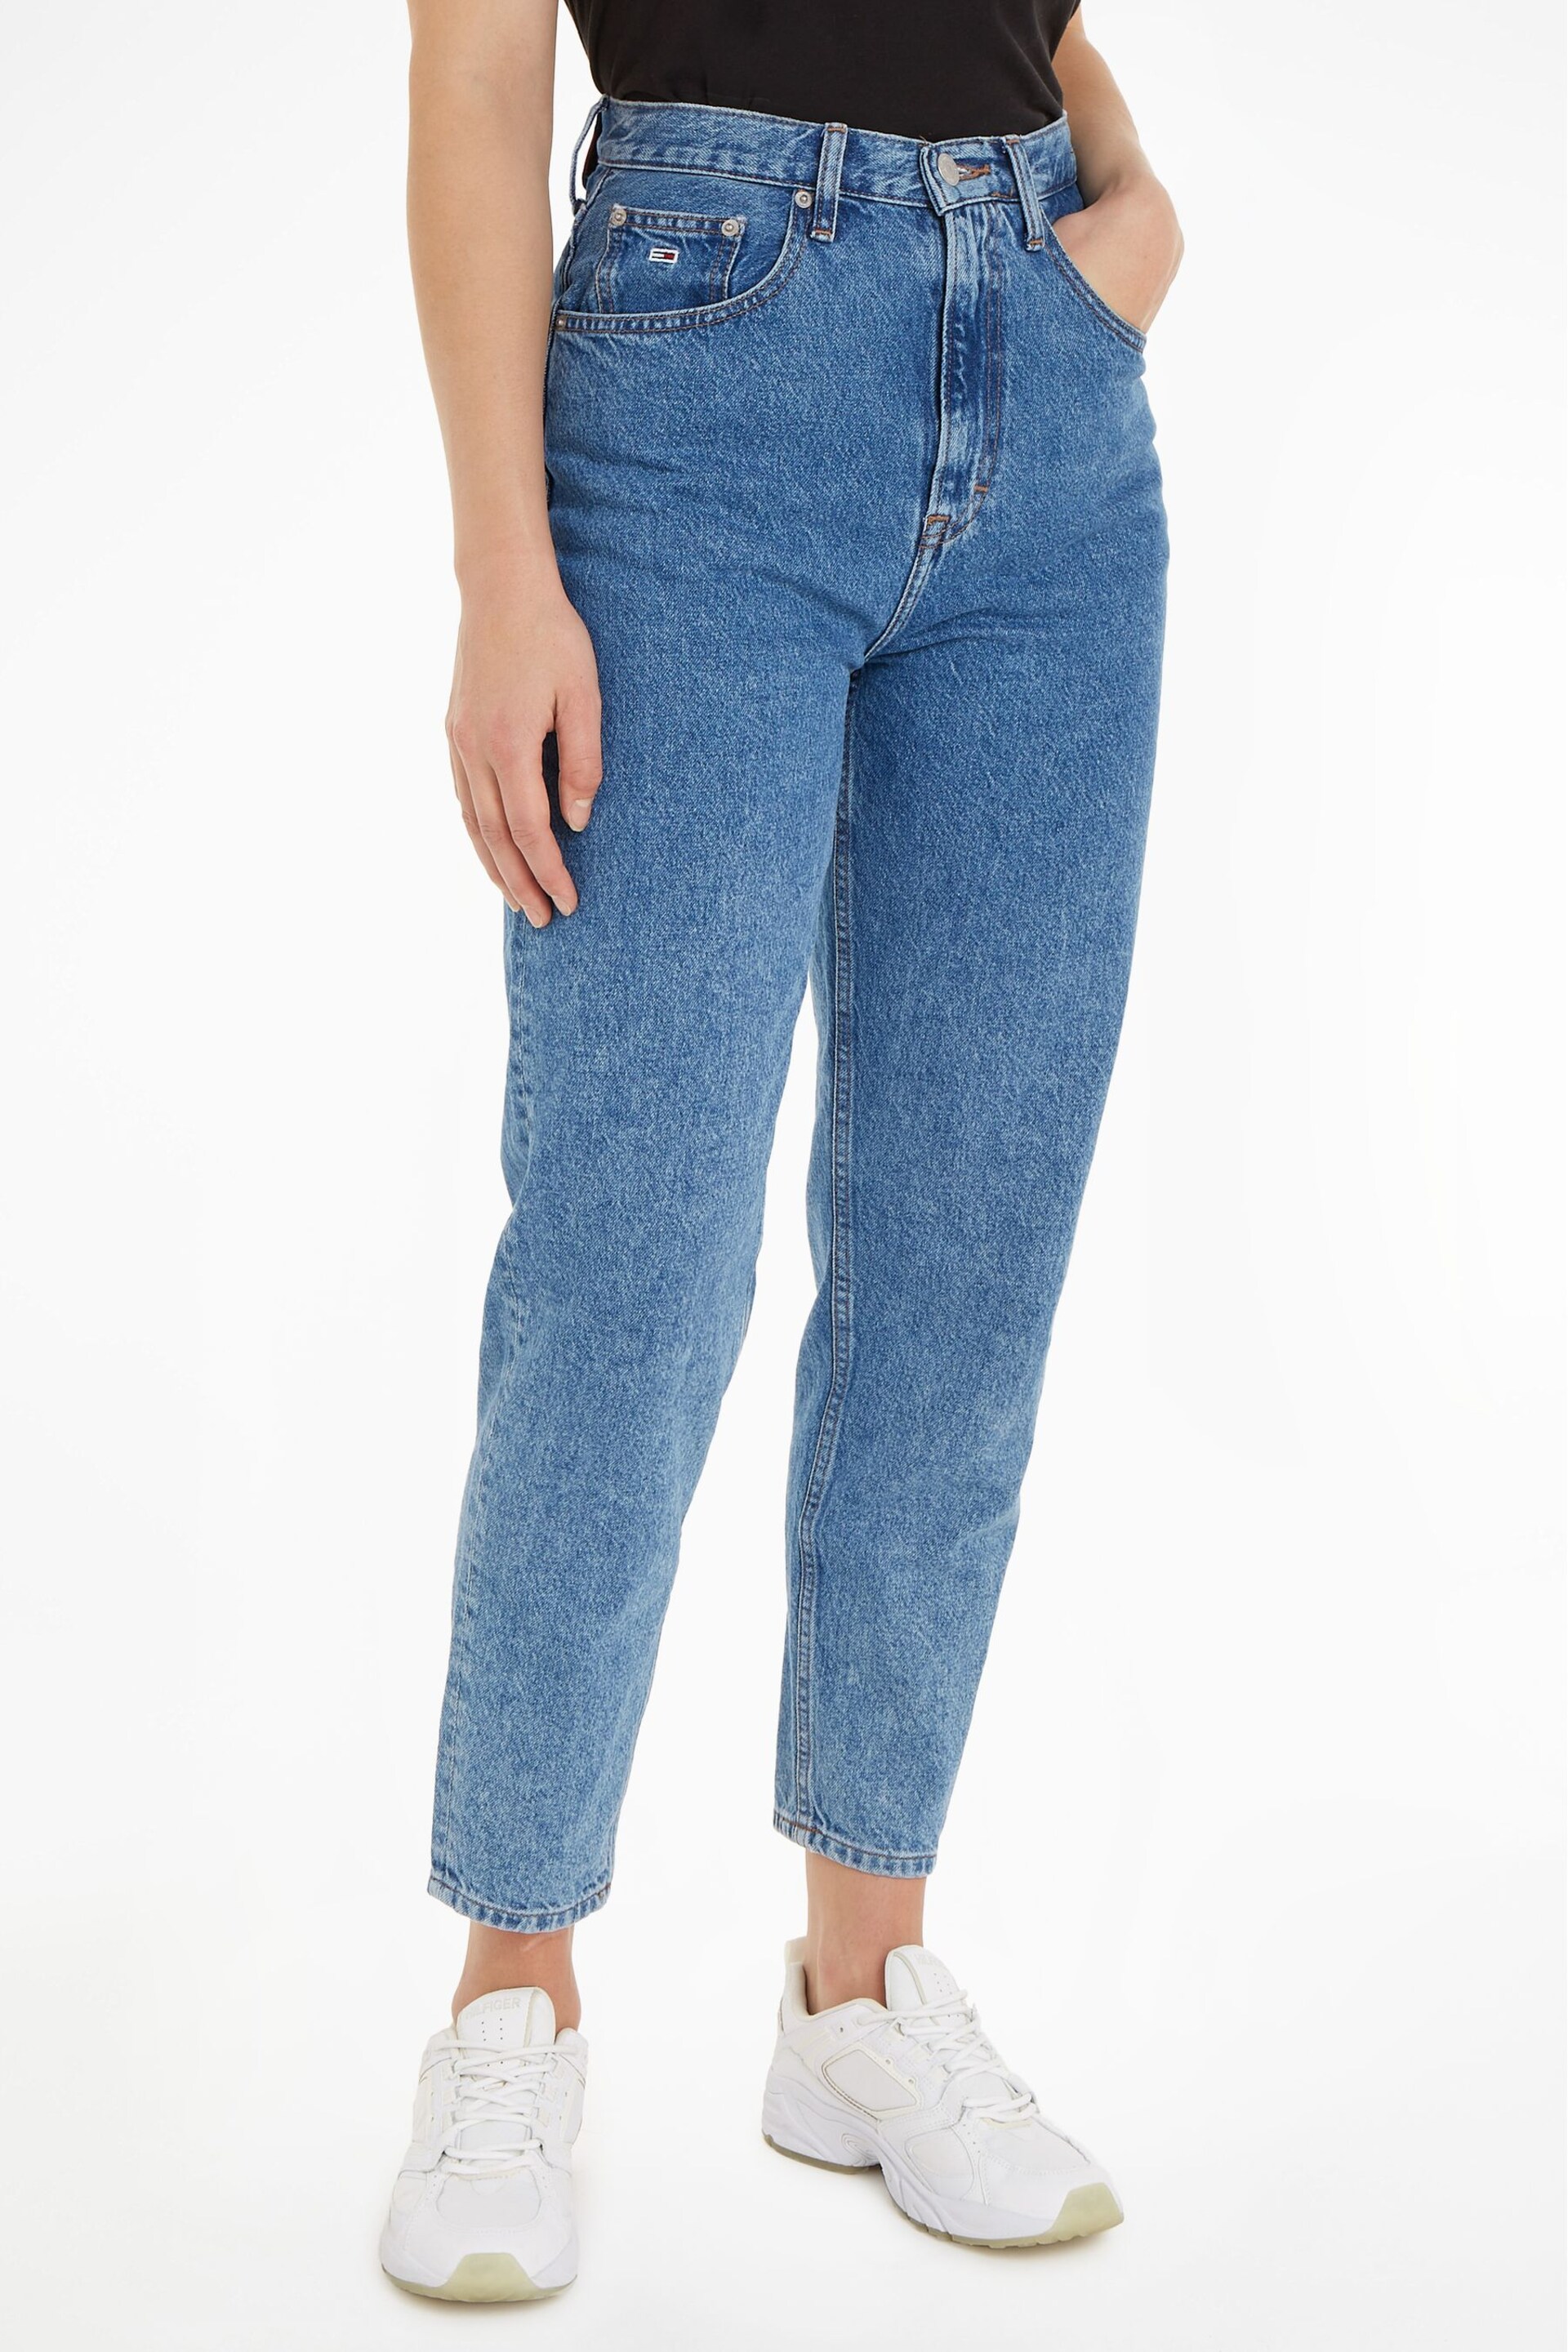 Tommy Jeans Blue Ultra High Rise Tapered Mom Jeans - Image 1 of 11